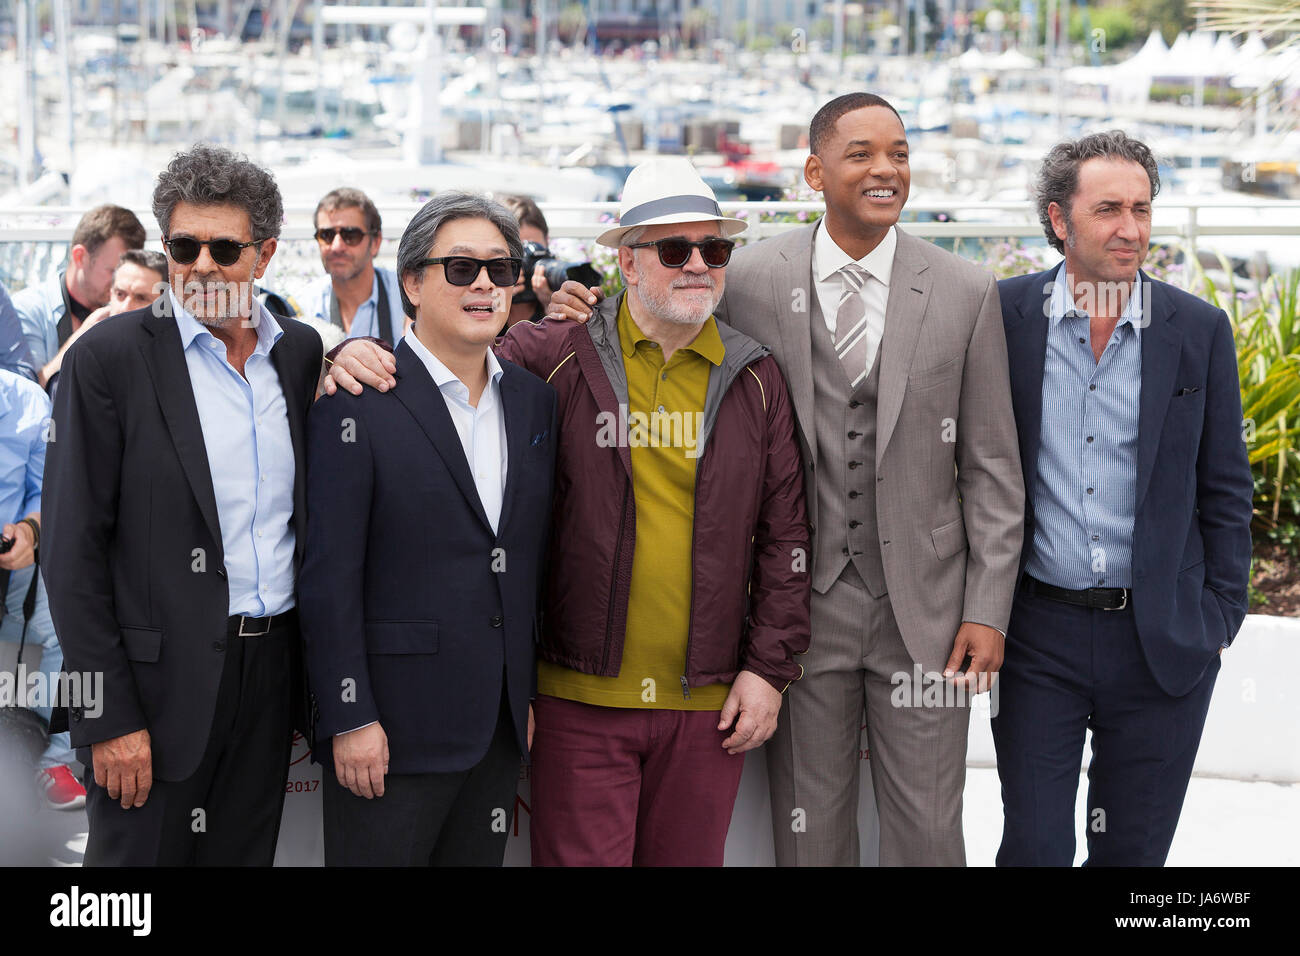 CANNES, FRANCE - MAY 17: Composer Gabriel Yared, Director Park Chan-wook, director Pedro Amoldovar, actor Will Smith and director Paolo Sorrentino attends the Jury photocall during the 70th annual Cannes Film Festival at Palais des Festivals on May 17, 2017 in Cannes, France. Laurent Koffel/Alamy Live News Stock Photo